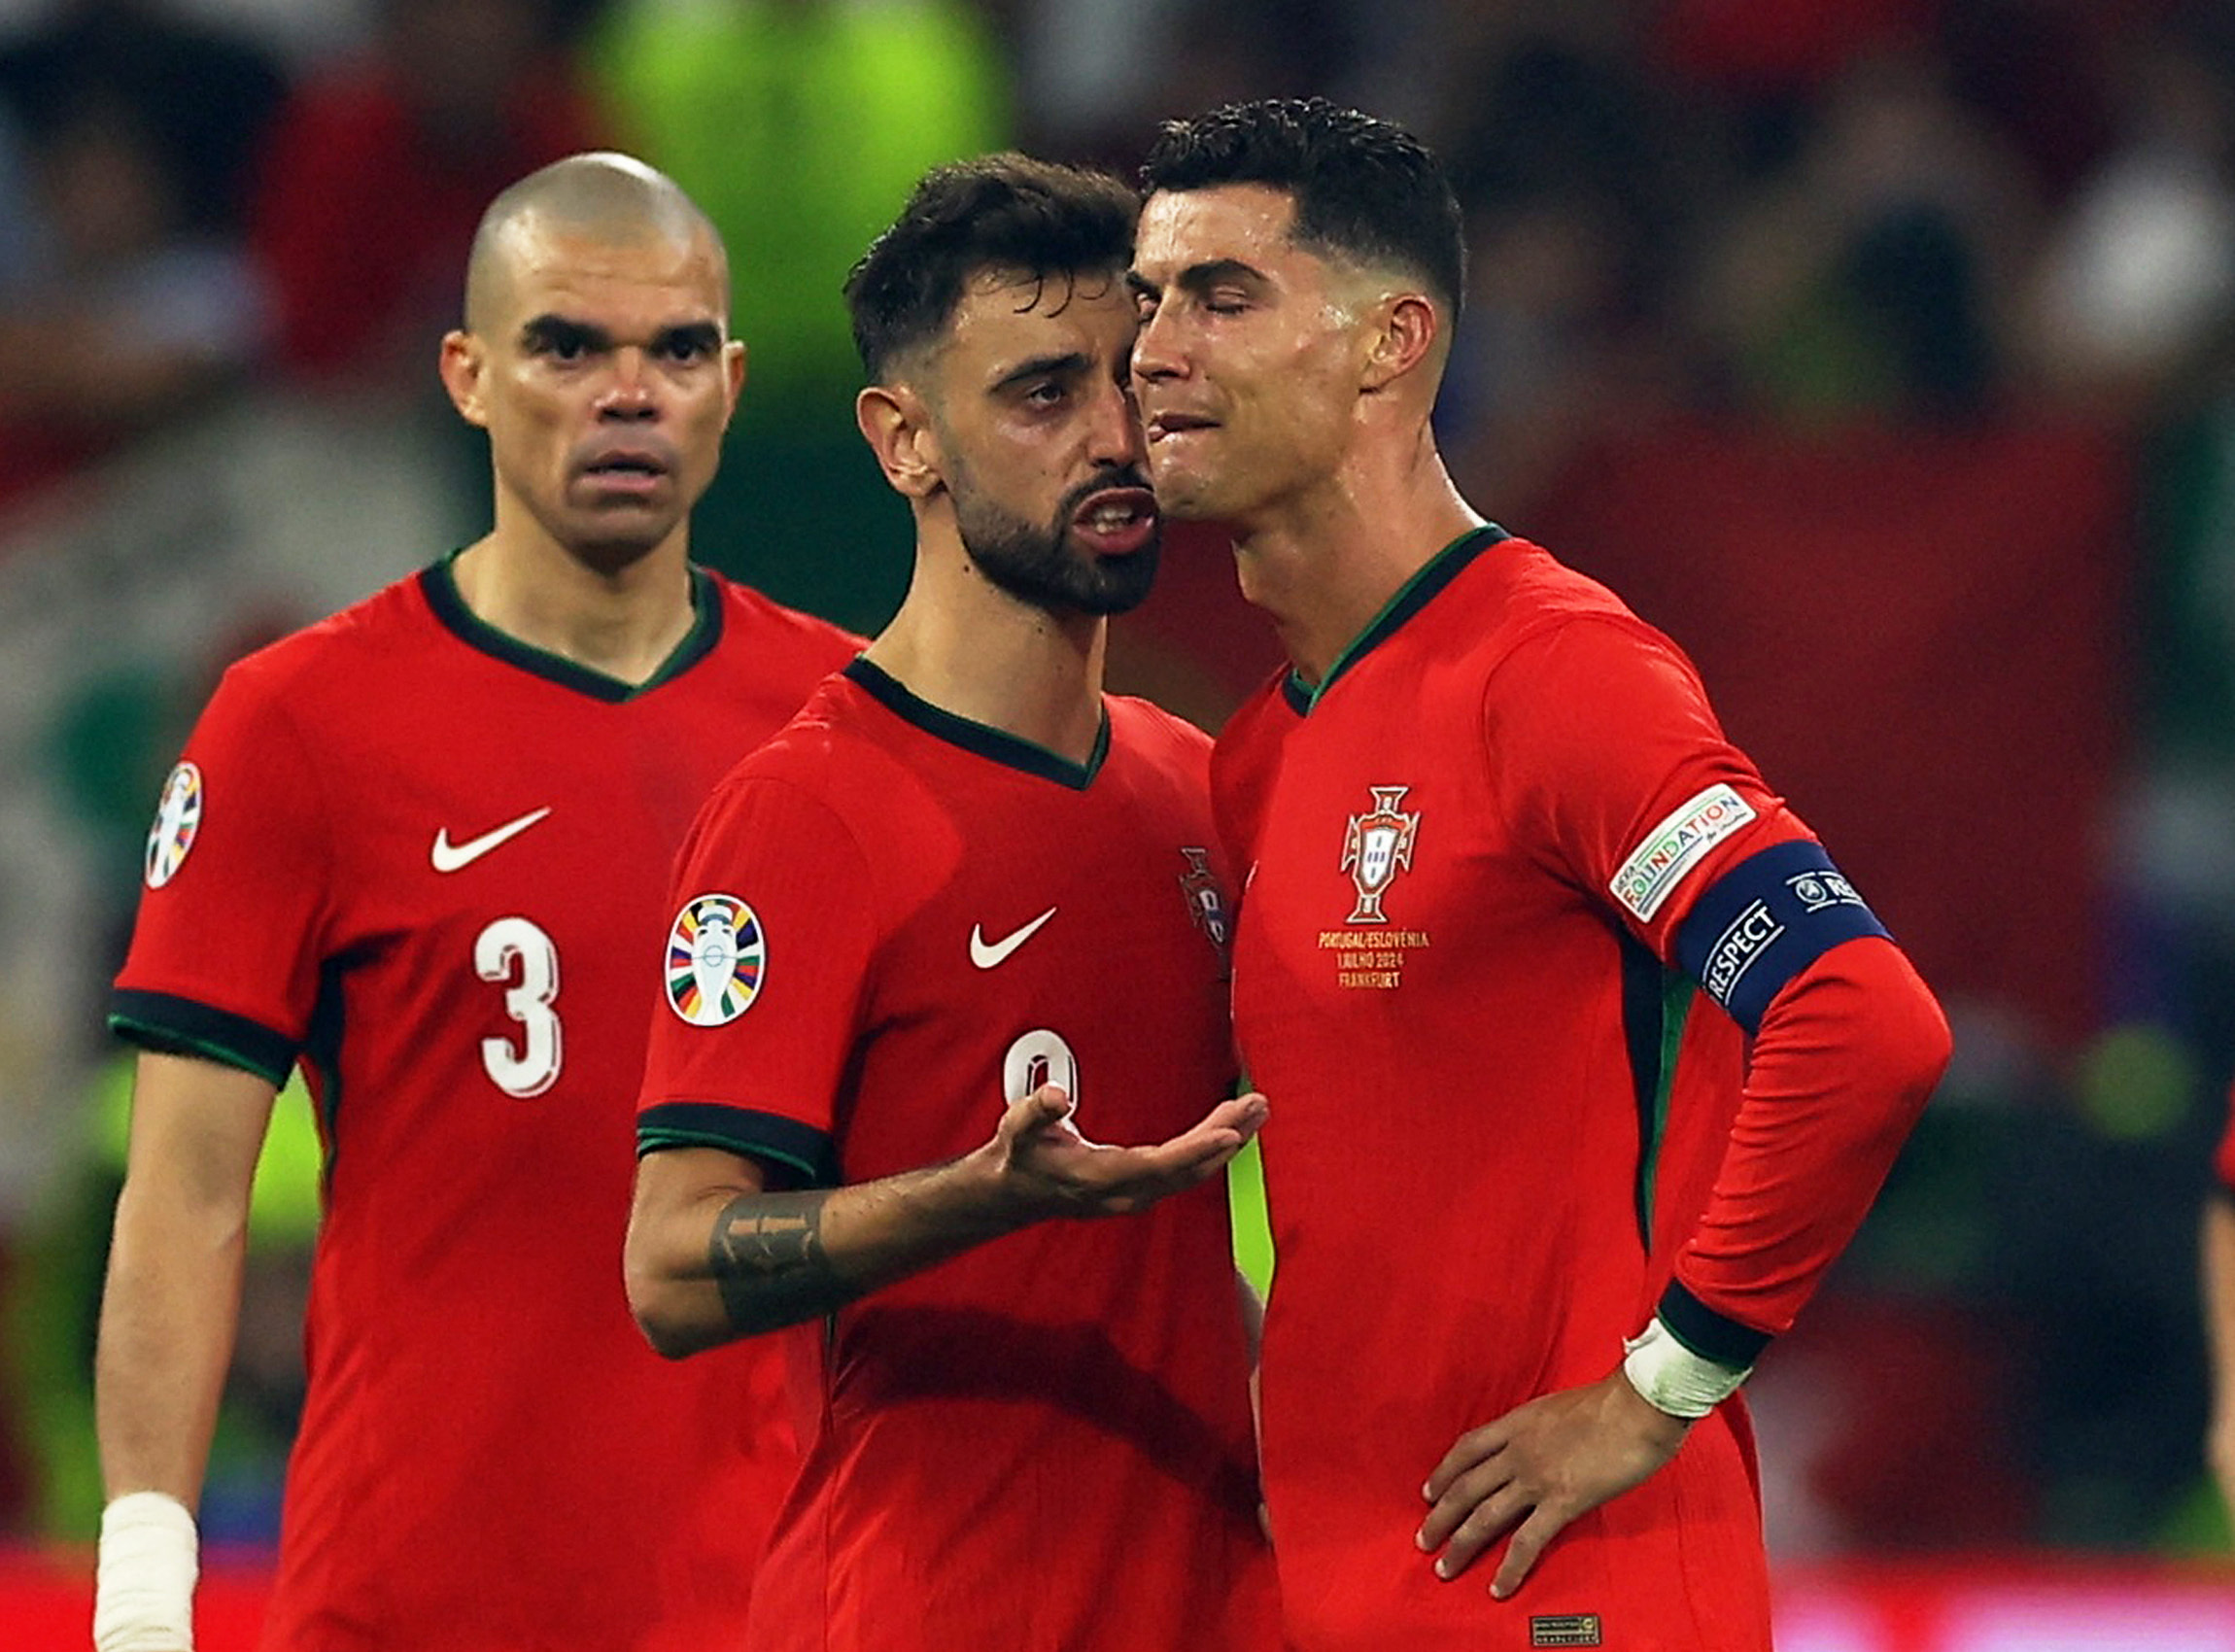 Bruno Fernandes was among the players supporting Ronaldo